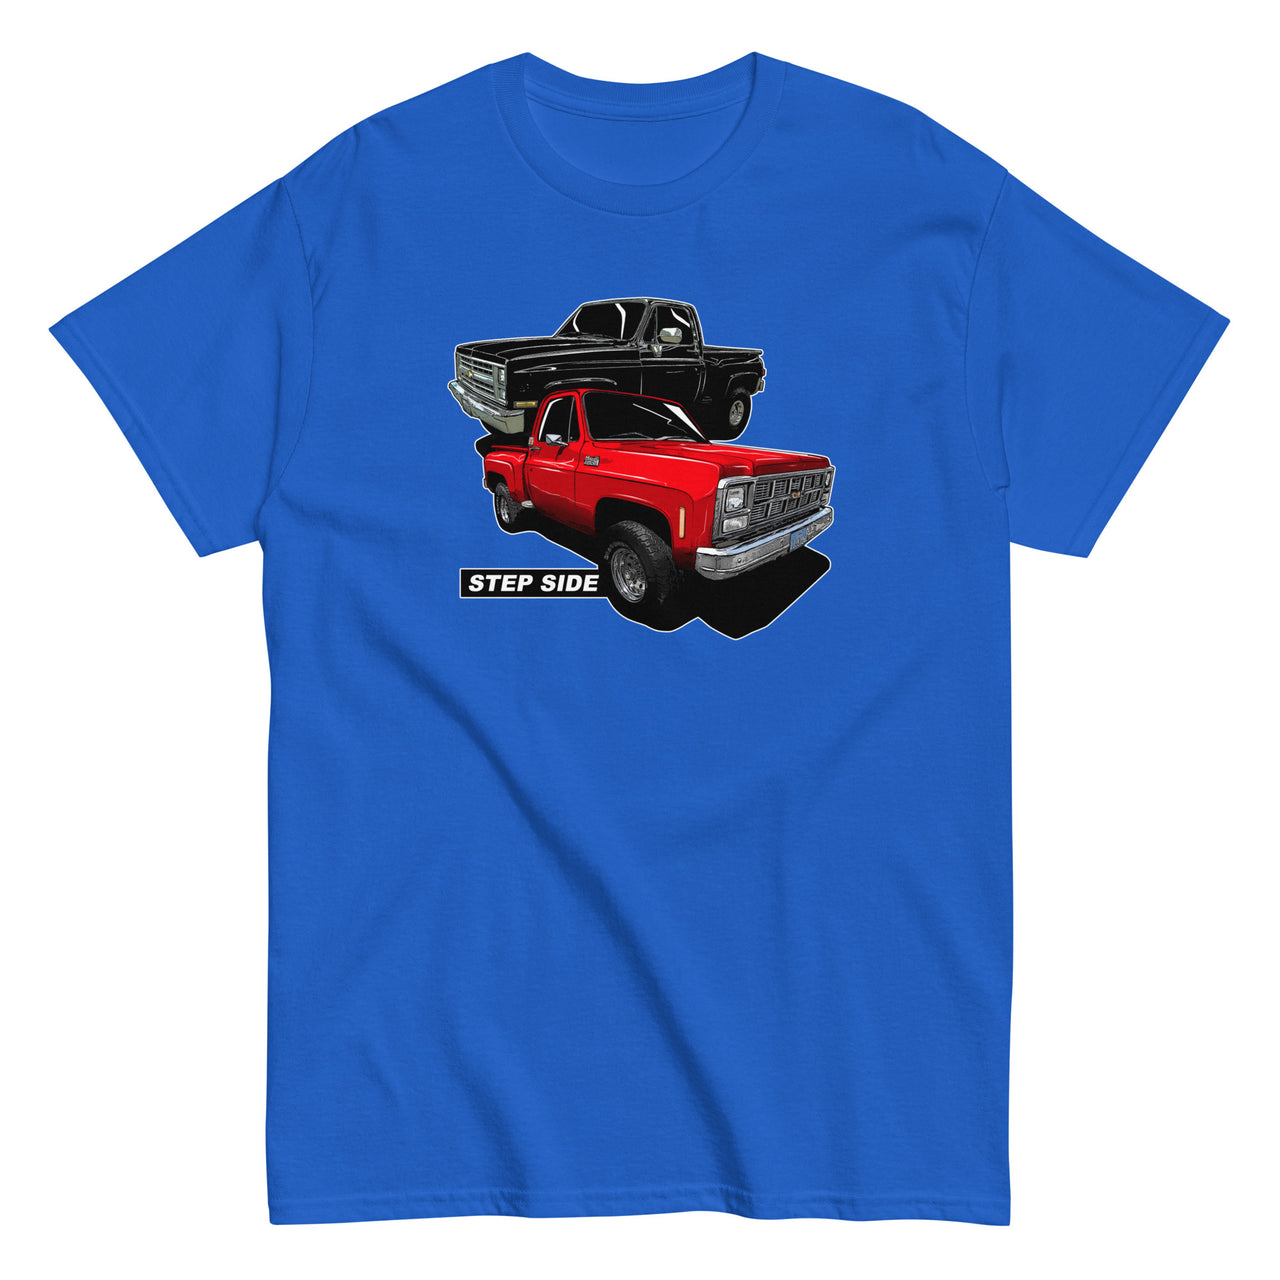 Square Body Step-Side T-Shirt in royal